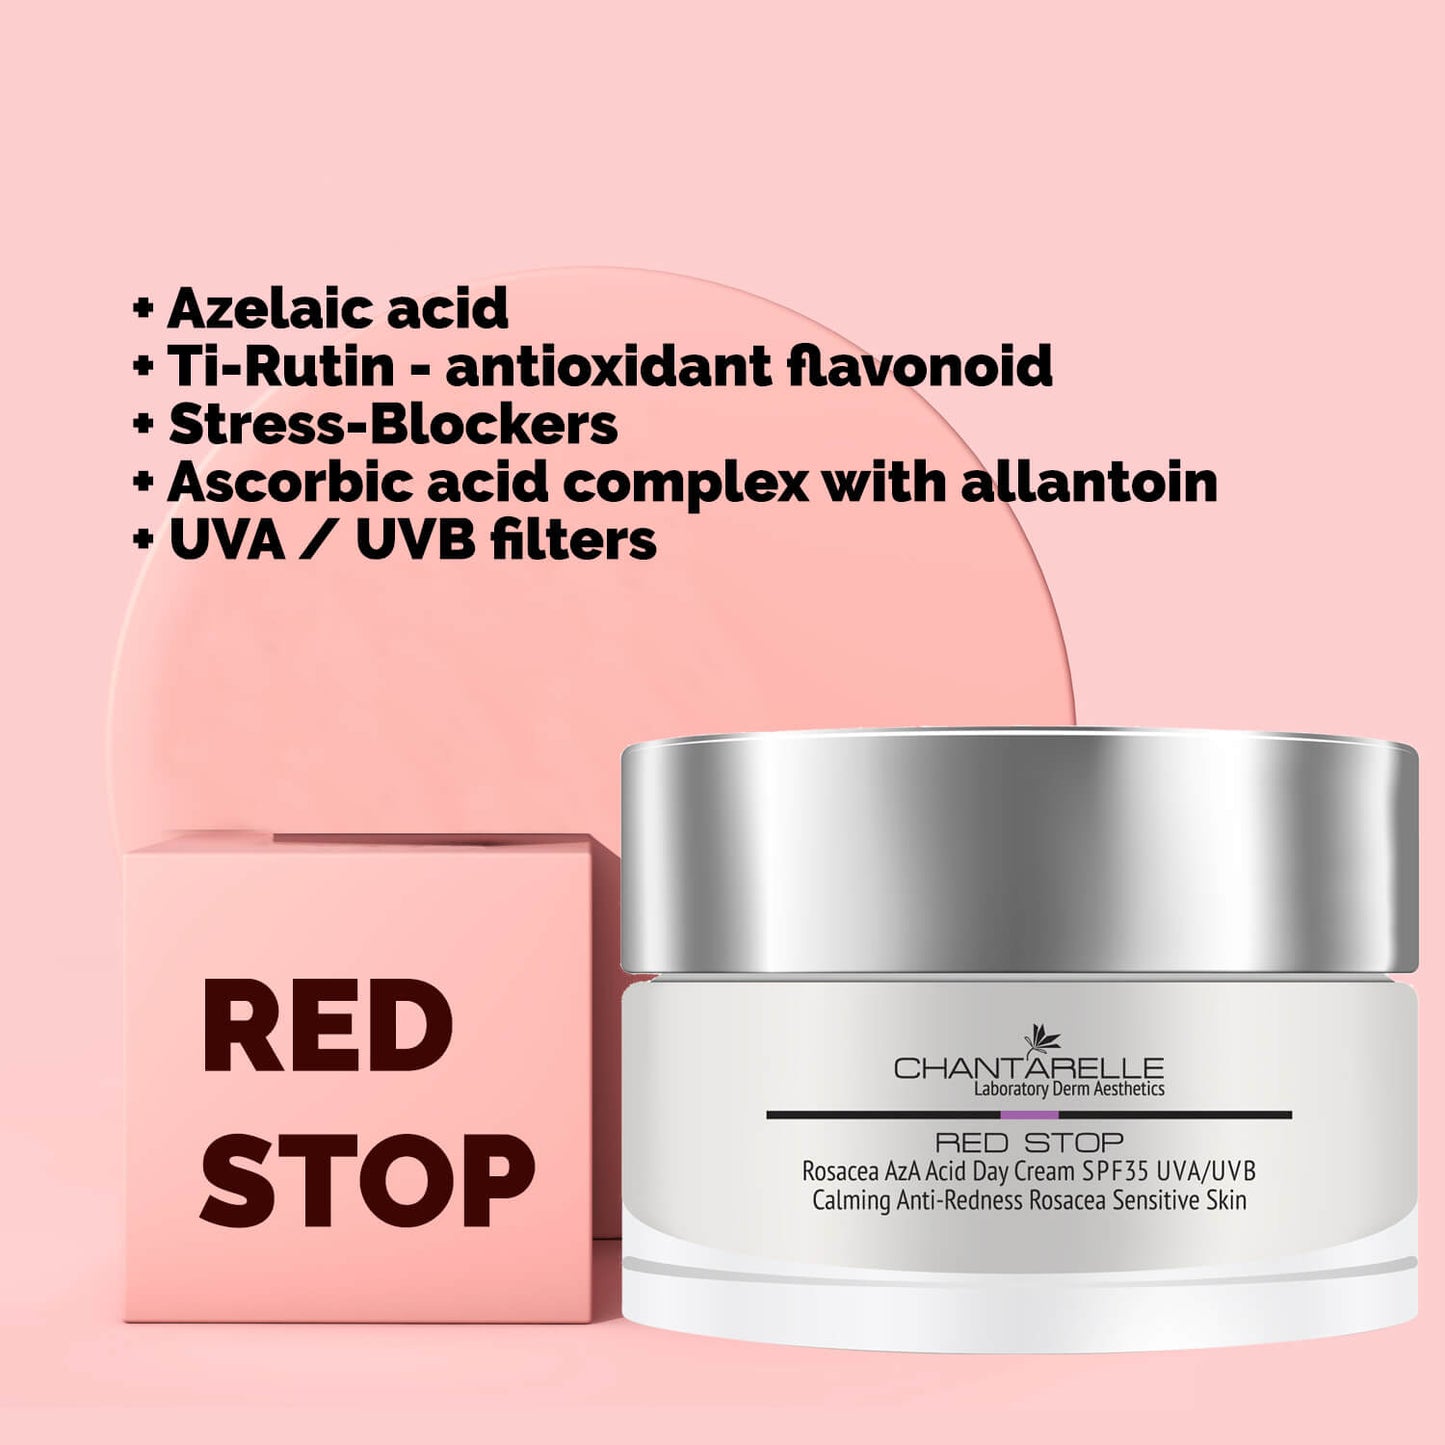 Red Stop Rosacea Day Cream SPF35